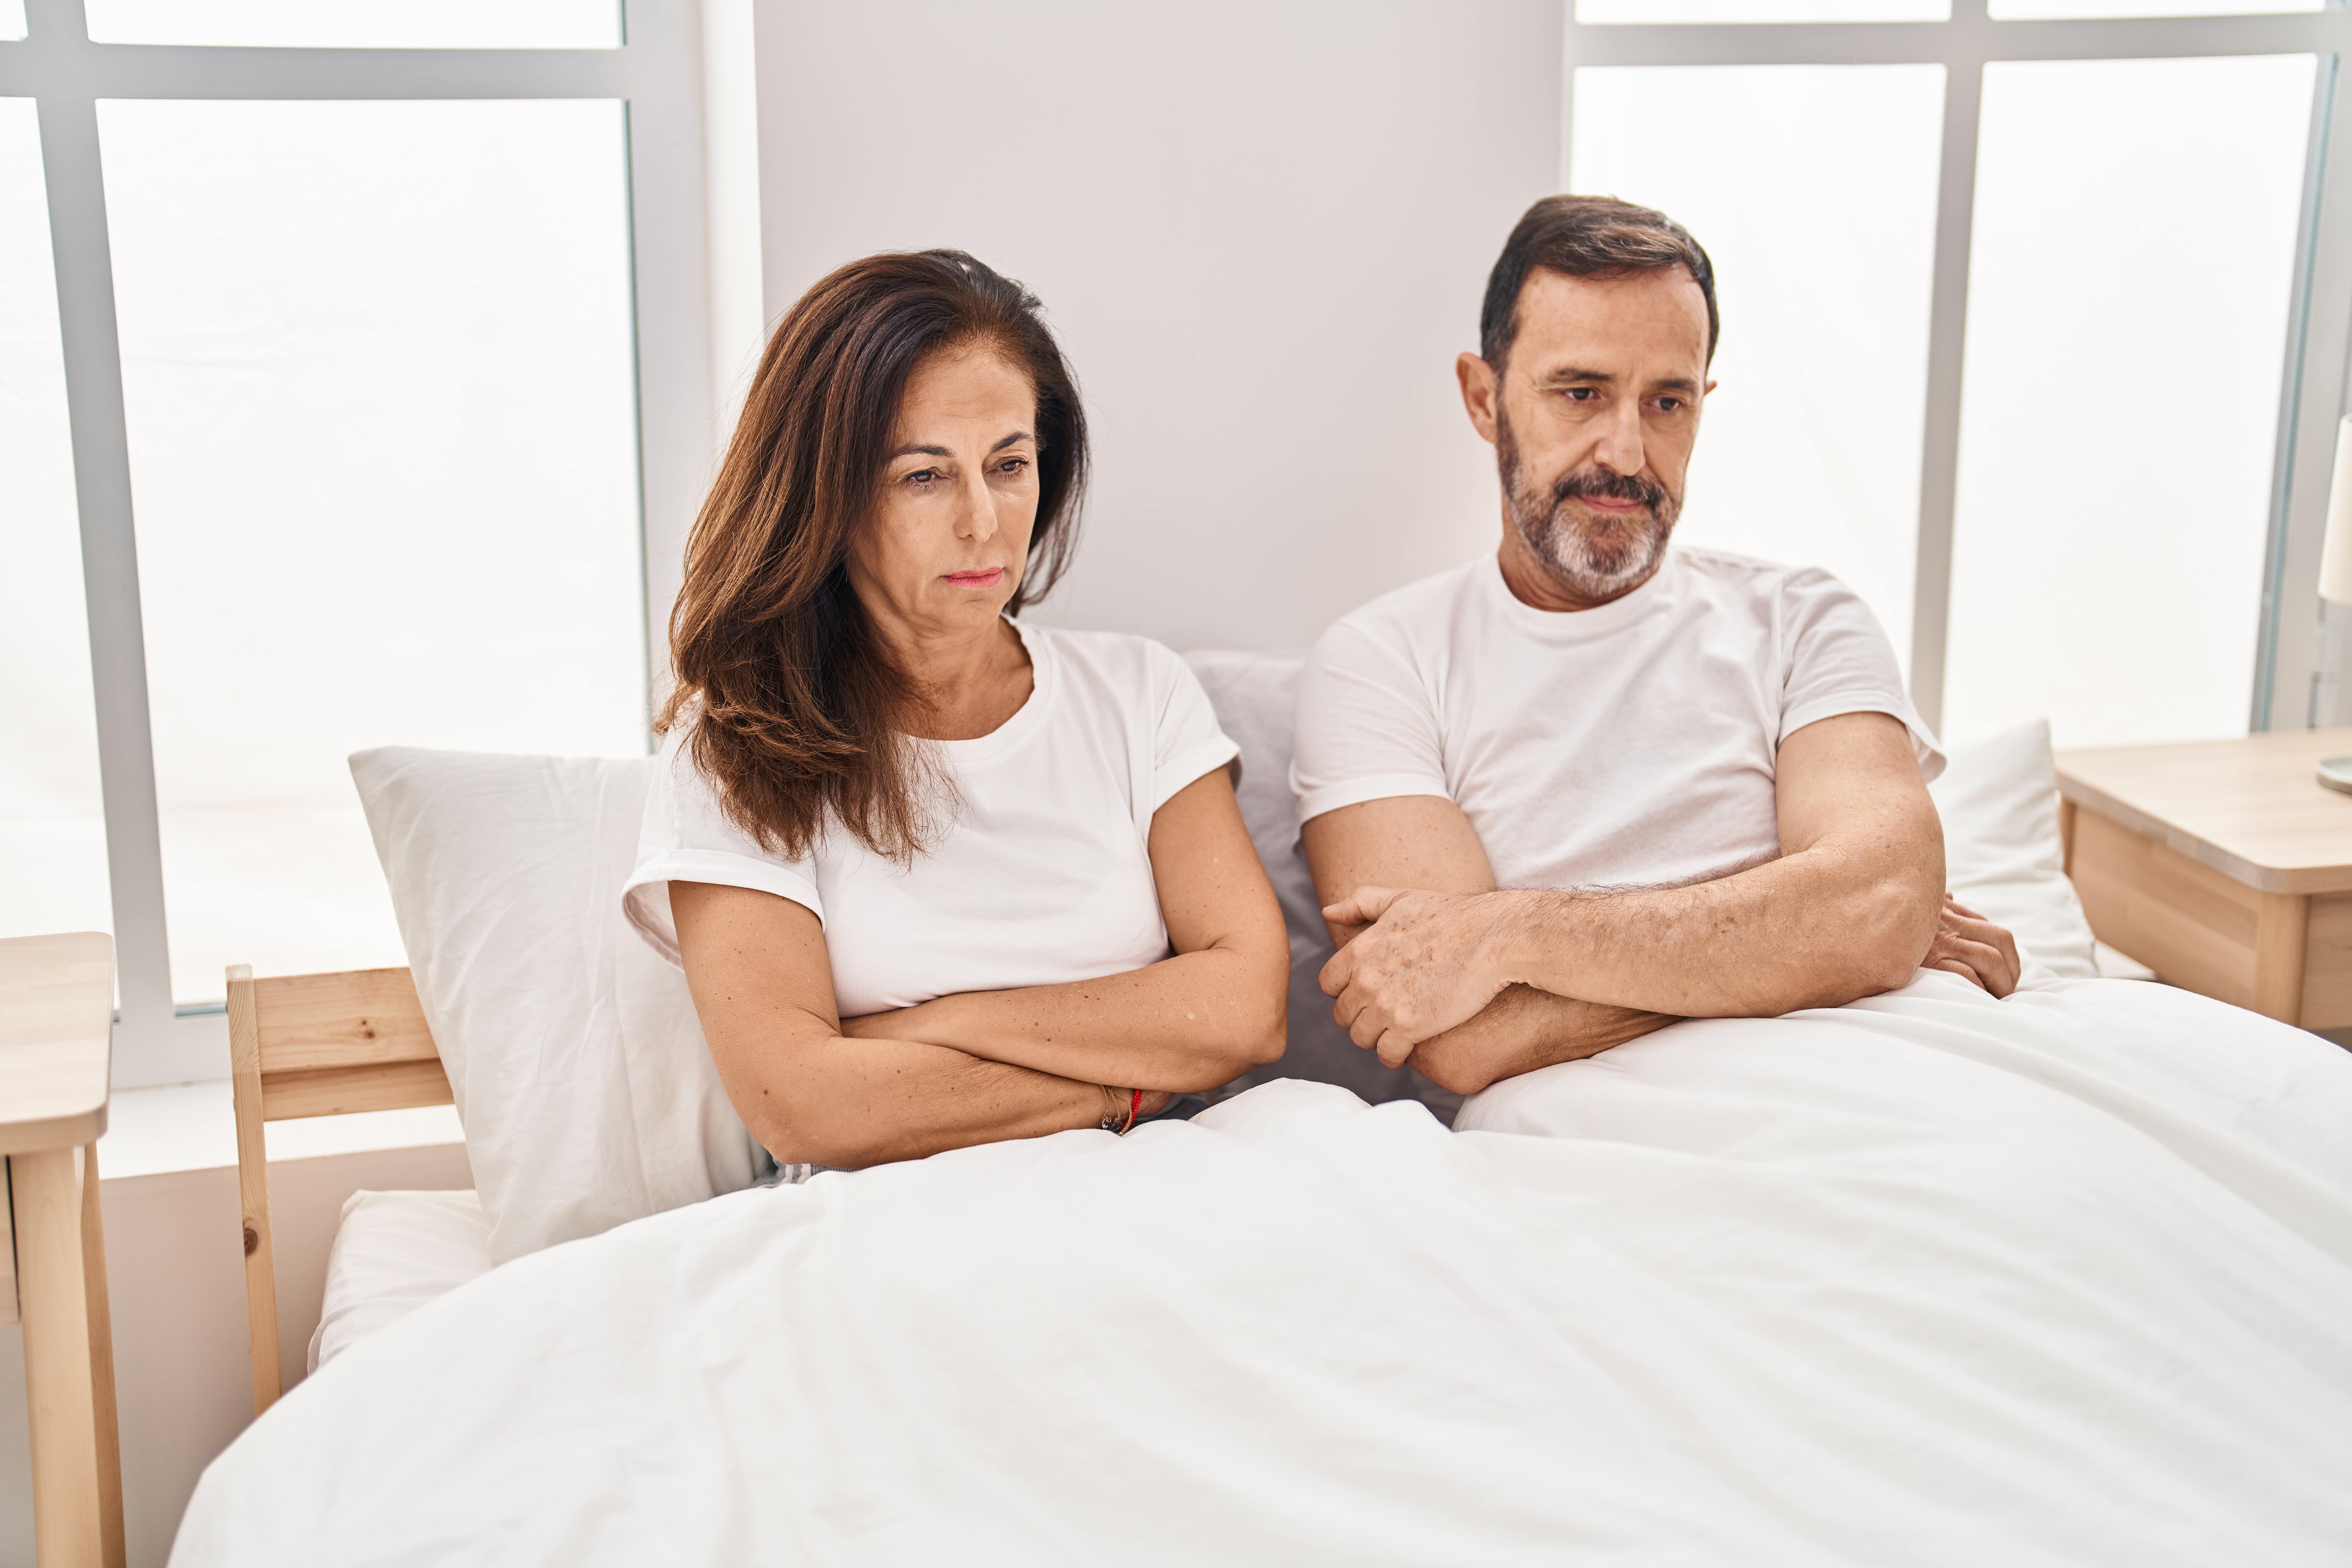 Middle-aged man and woman sitting up in bed with arms crossed looking unhappy